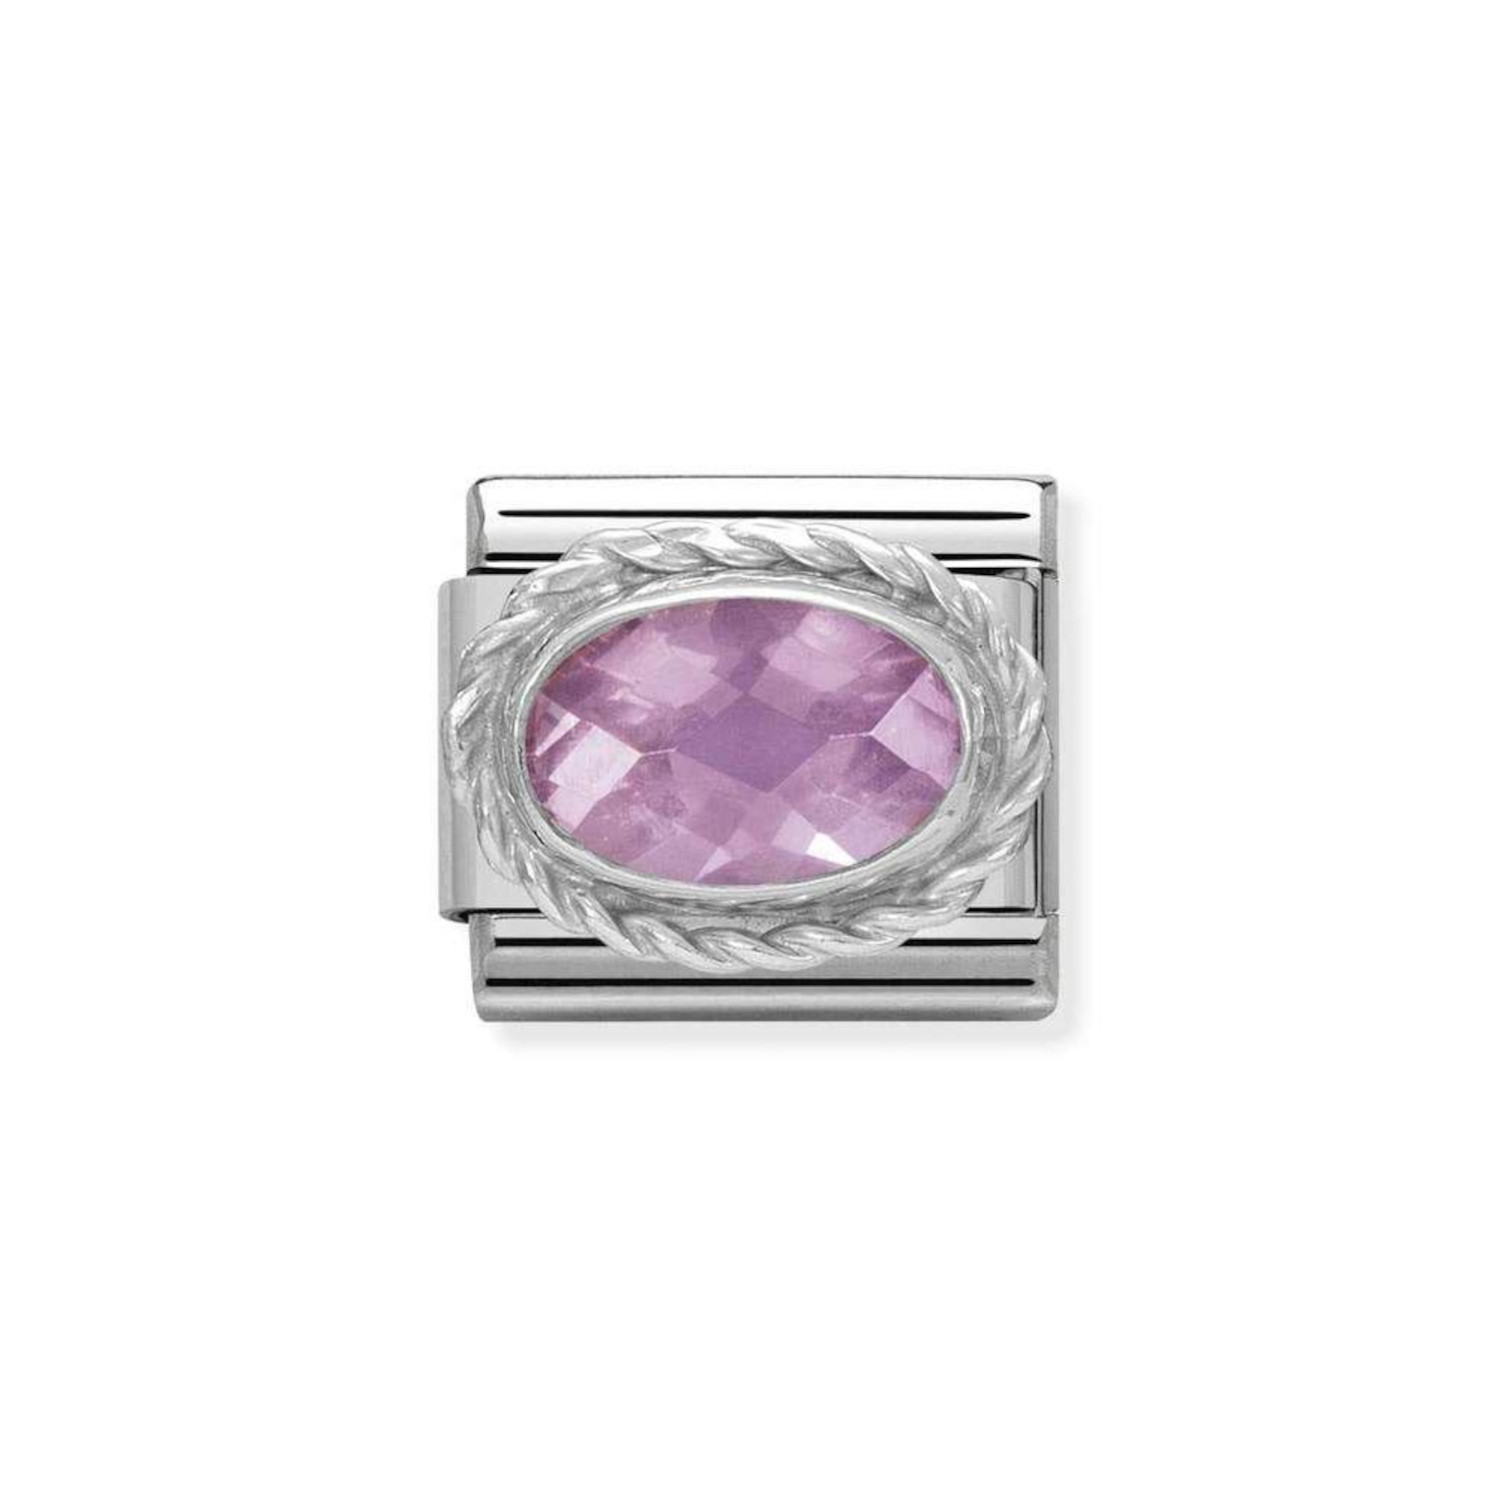 NOMINATION COMPOSABLE CLASSIC LINK IN STERLING SILVER WITH FACETED PINK STONE 330604/003